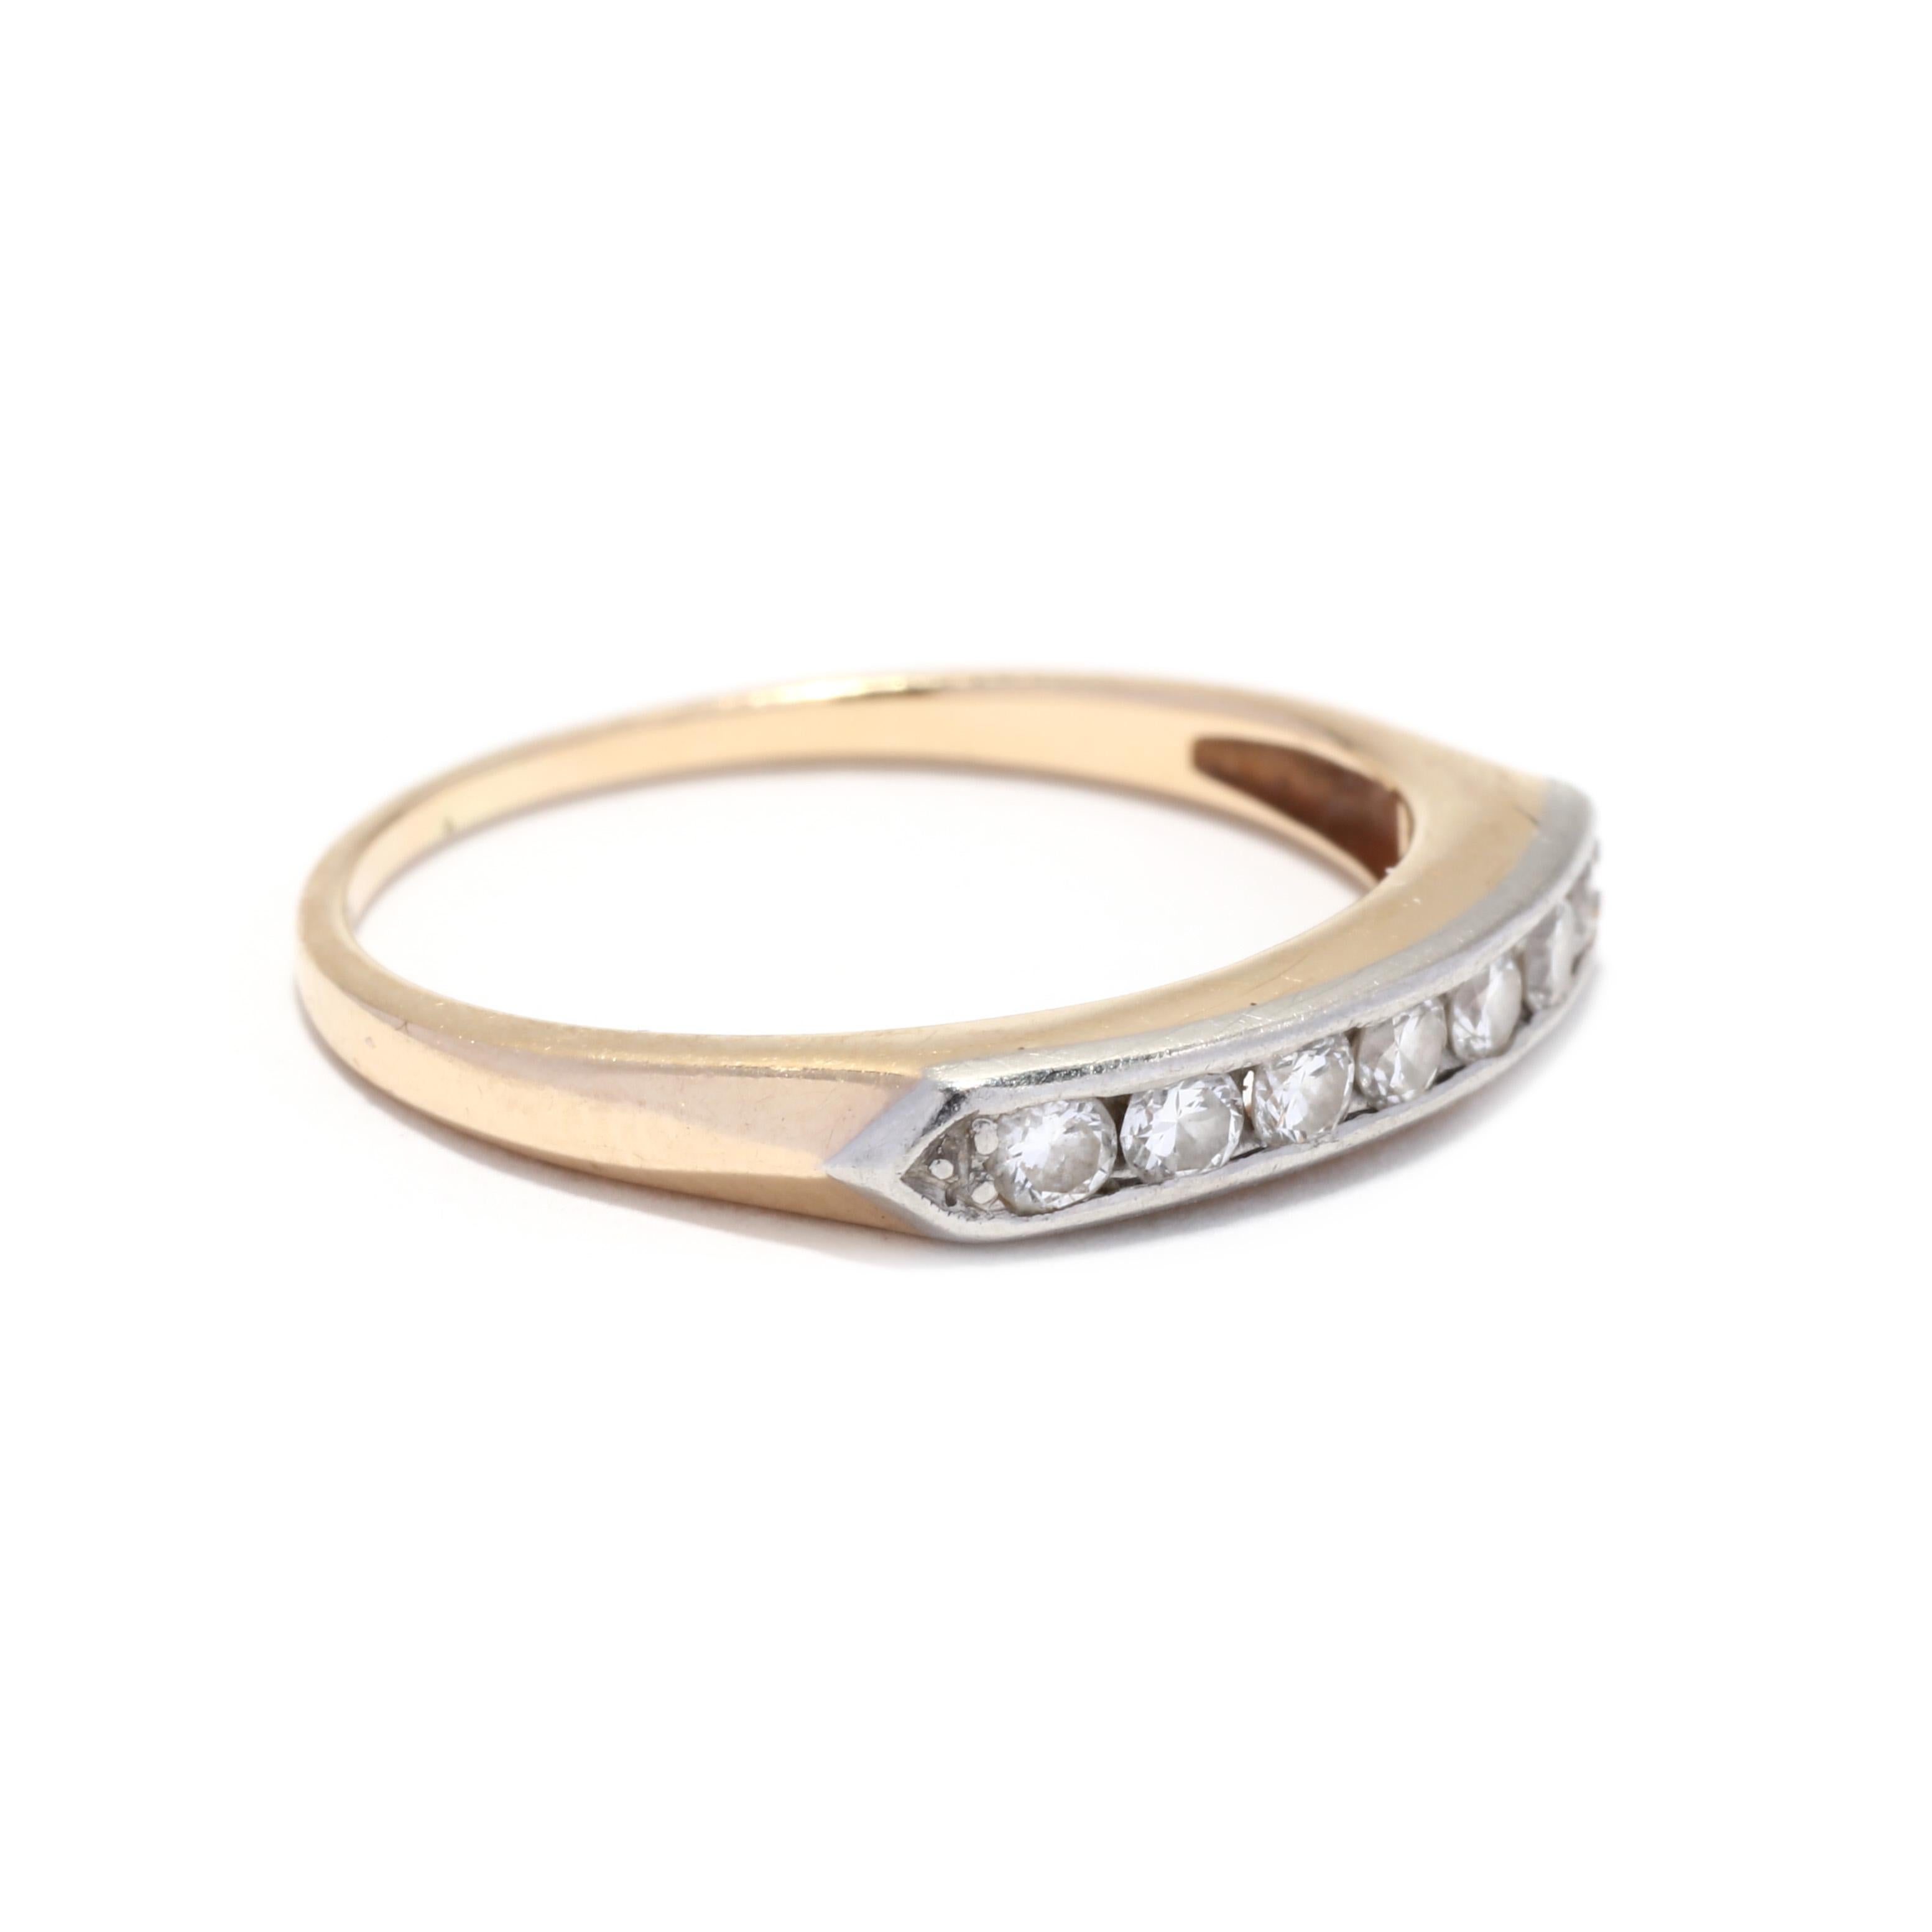 A retro 14 karat yellow and white gold diamond band. This ring features a row of pavé set single cut round diamonds weighing approximately .05 total carats set in white gold and with a tapered yellow gold band.

Stones:
- diamonds, 7 stones
- single